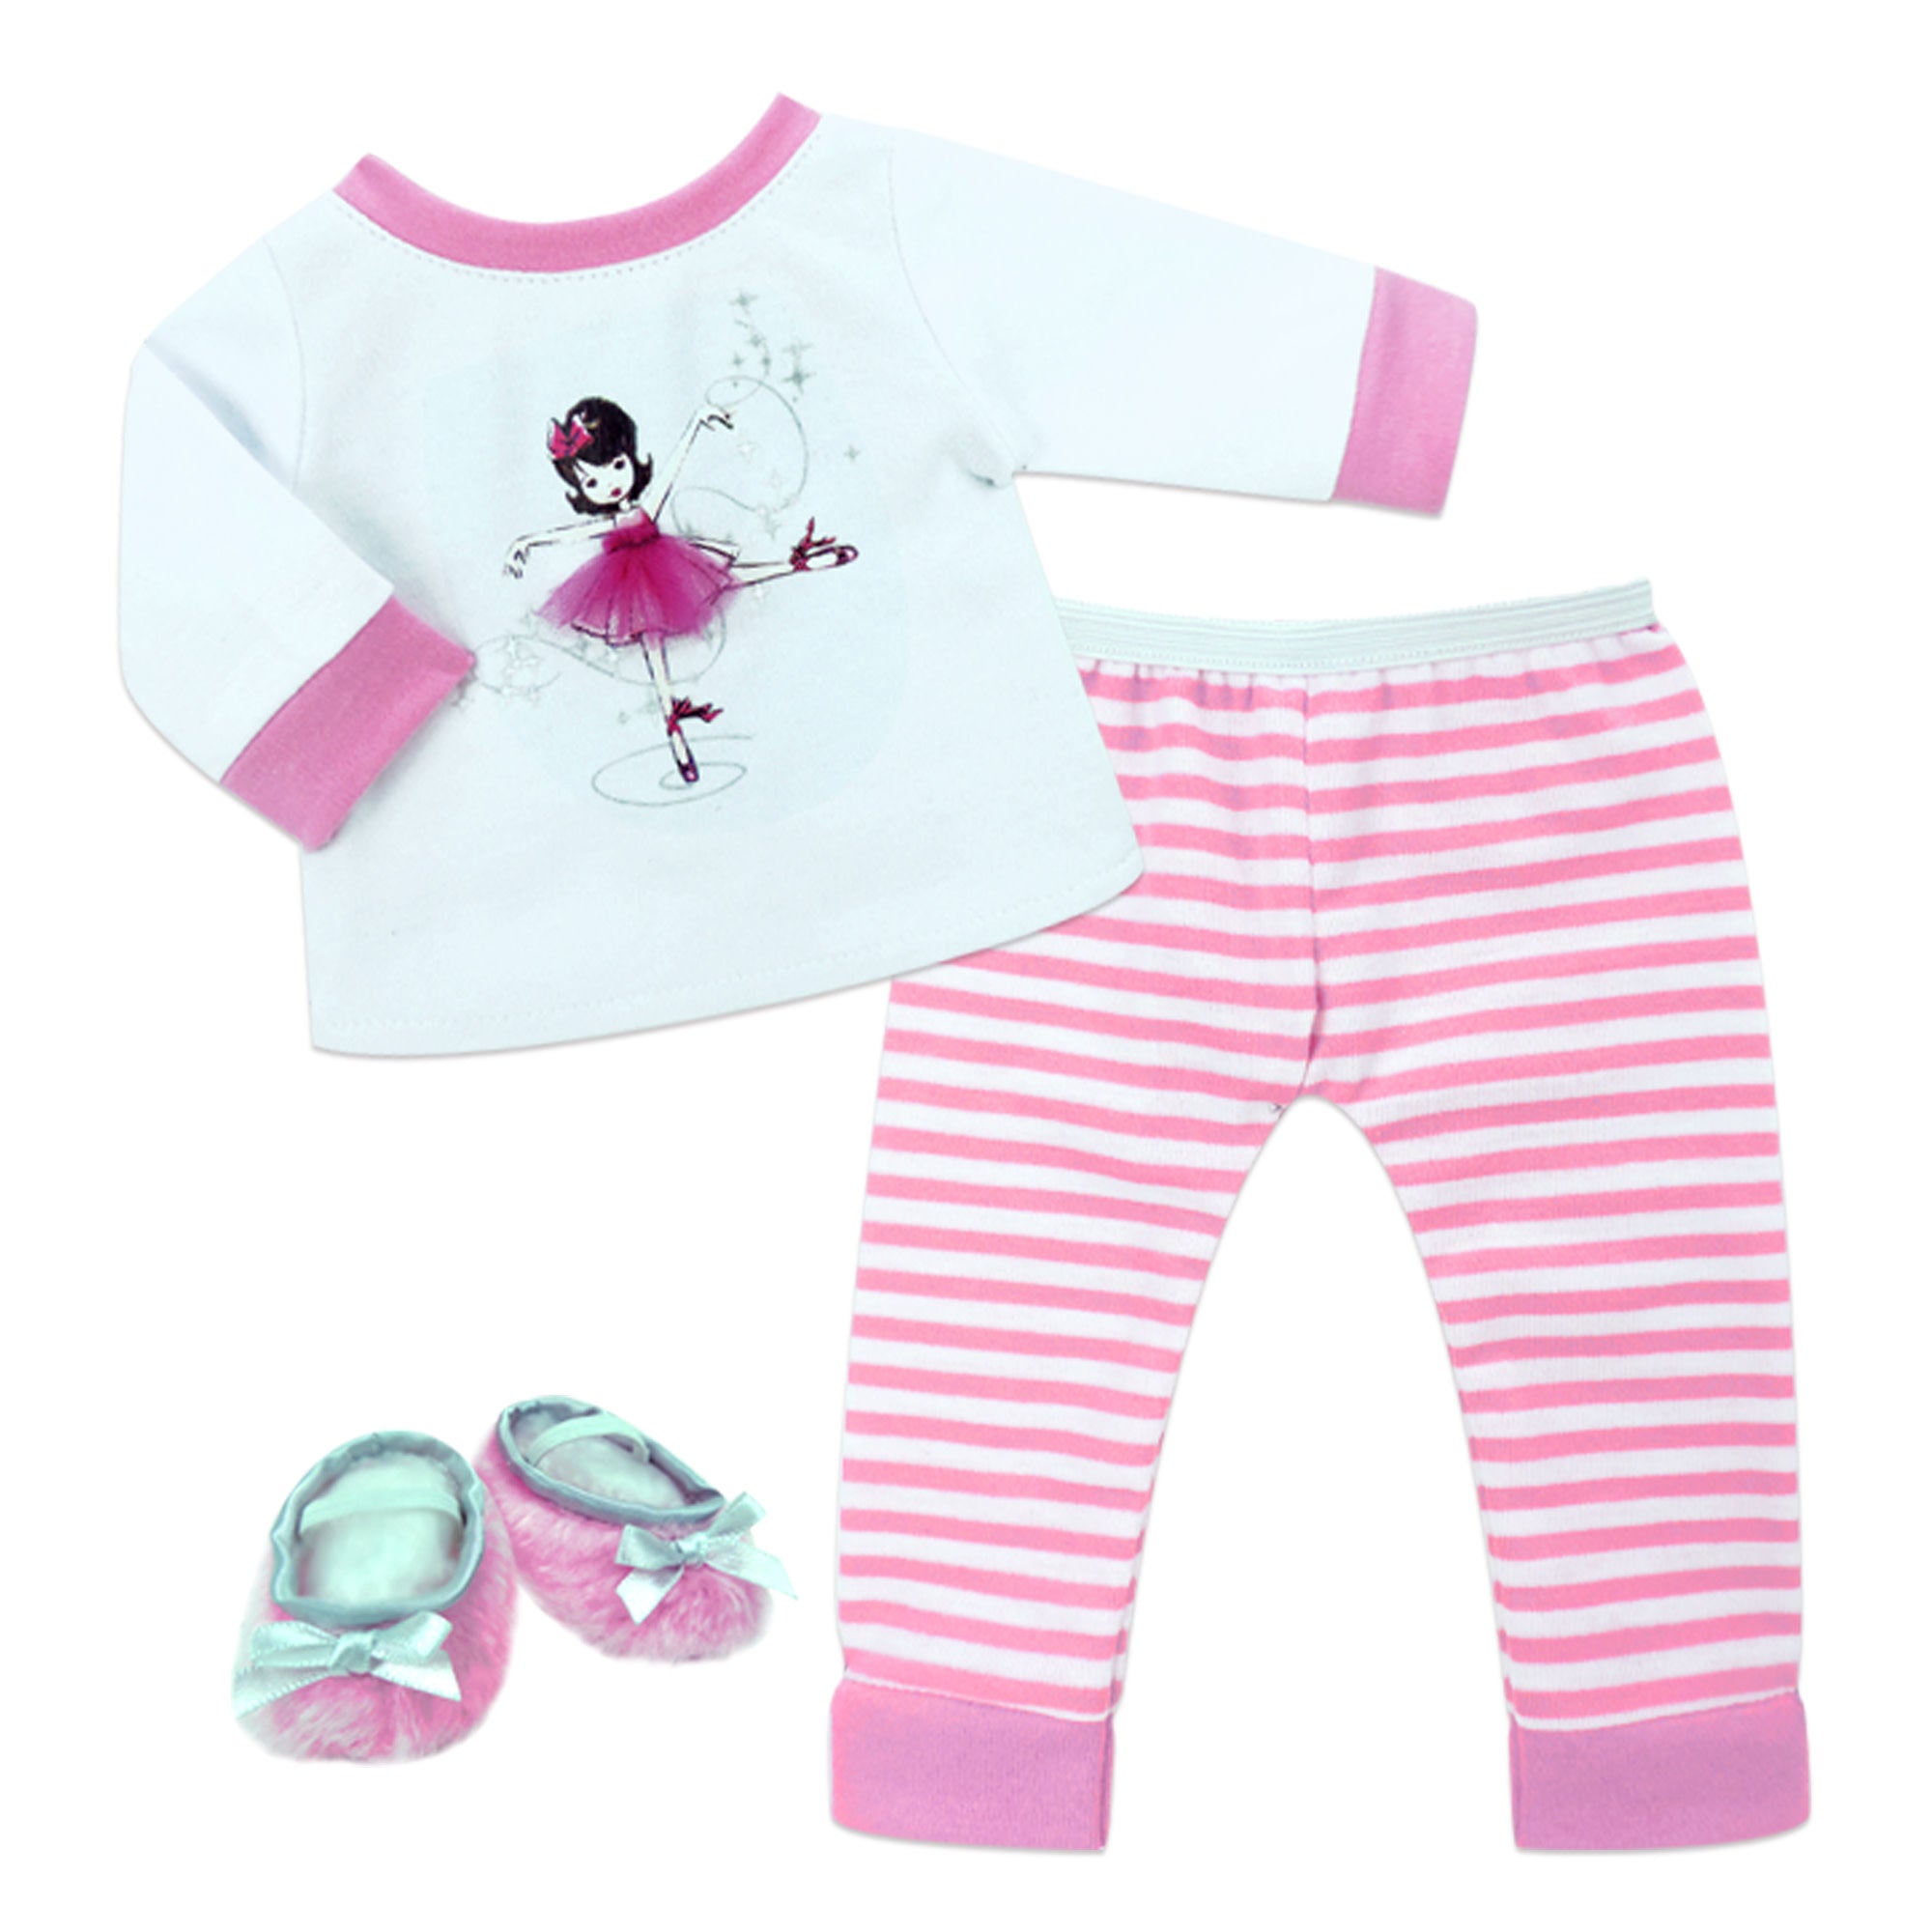 Sophia’s Long-Sleeved Ballerina Design Sleep Tee, Striped Pajama Pants, & Fuzzy Faux Fur Slippers with Silver Bows Complete Outfit Set for 15” Baby Dolls, Light Pink/White